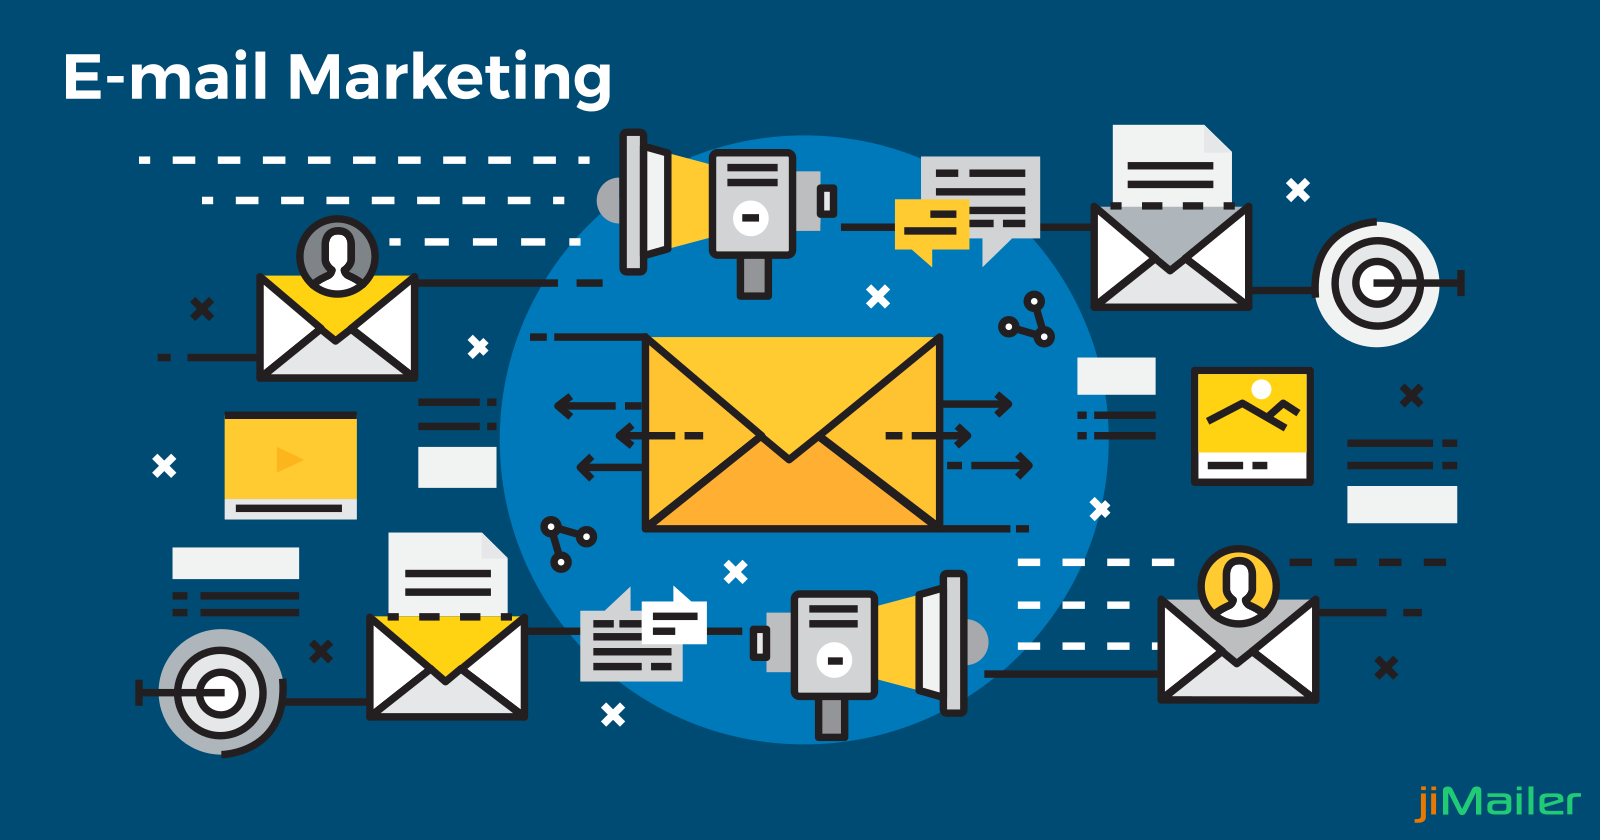 Choosing an Appropriate Email Marketing Platform For Your Business